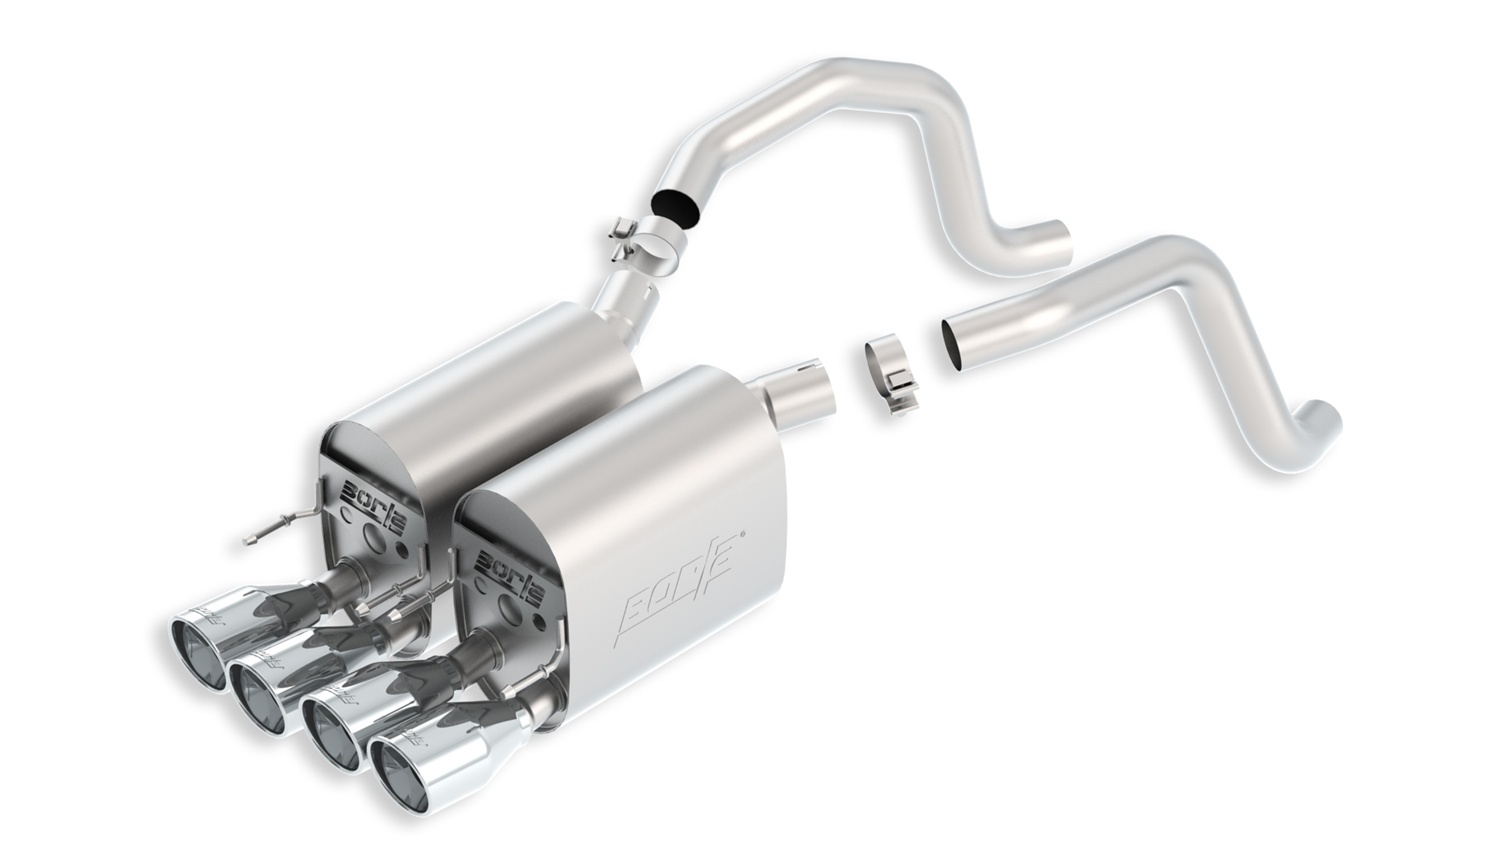 Borla 11815 Exhaust System, Touring, S-Type II, 2-1/2 in Diameter, Dual Center Exit, Quad 4 in Polished Tips, Stainless, Natural, GM LS-Series, Chevy Corvette 2005-08, Kit